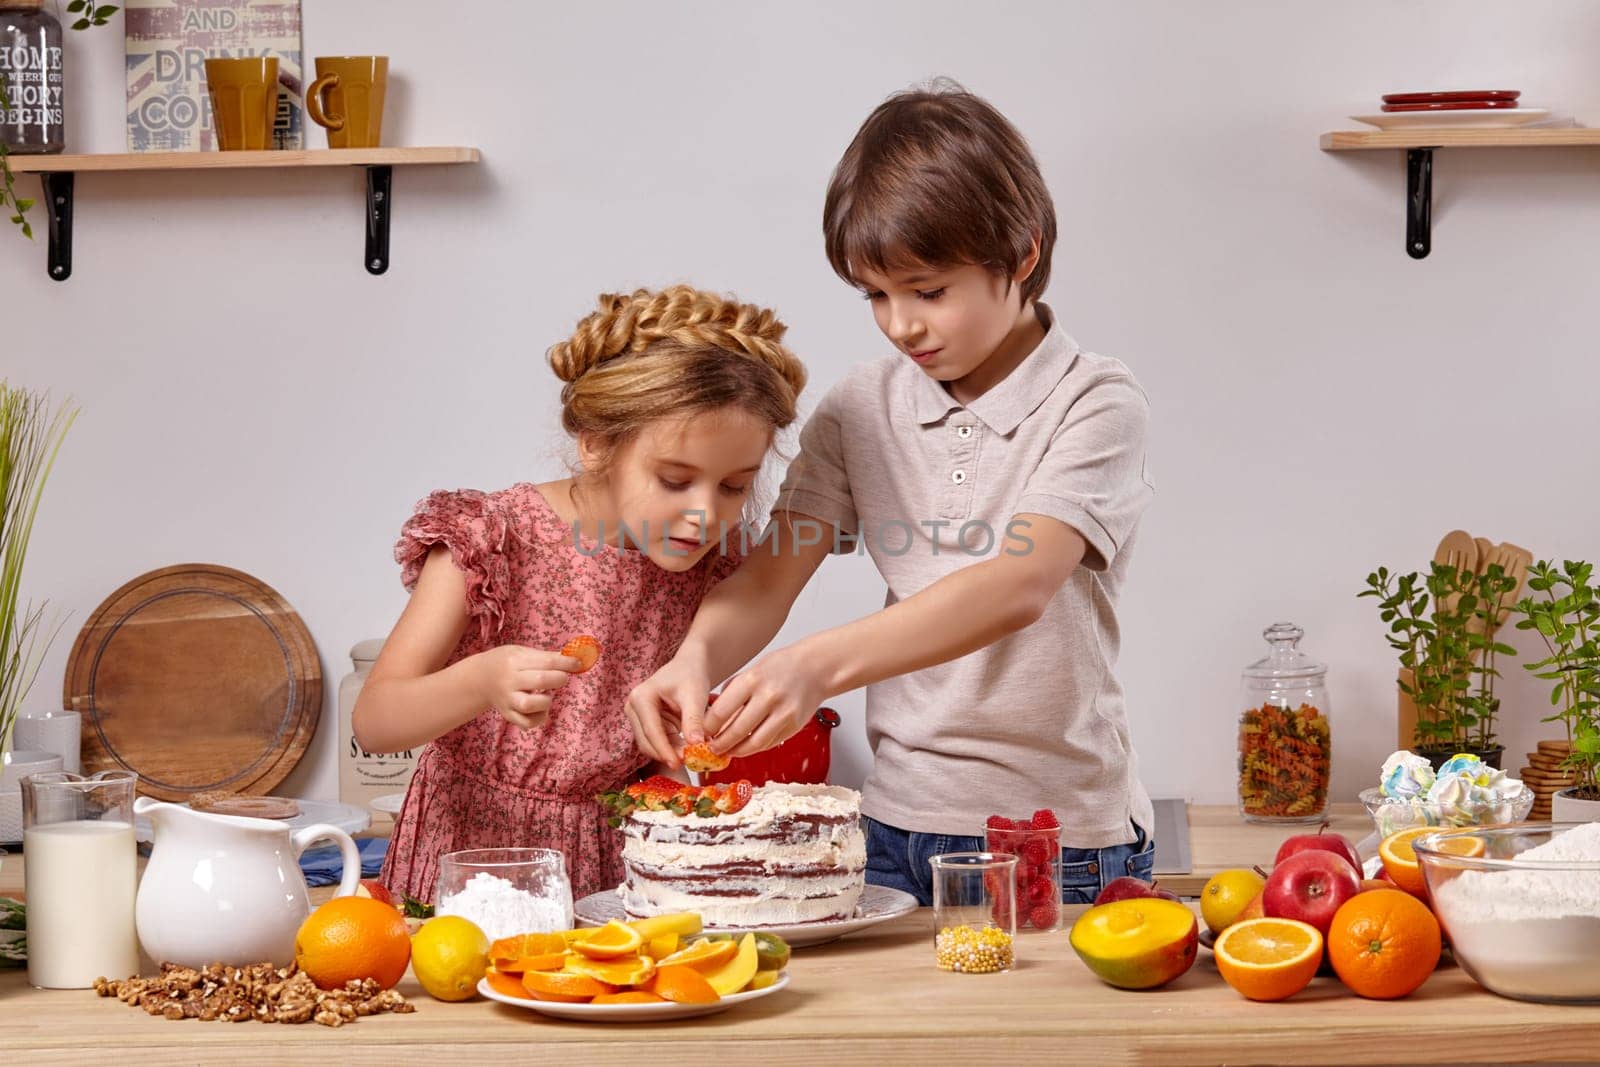 Brunette kid dressed in a light t-shirt and jeans and a beautiful girl with a braid in her hair, wearing in a pink dress are making a cake at a kitchen, against a white wall with shelves on it. They are decorating it with some strawberries.